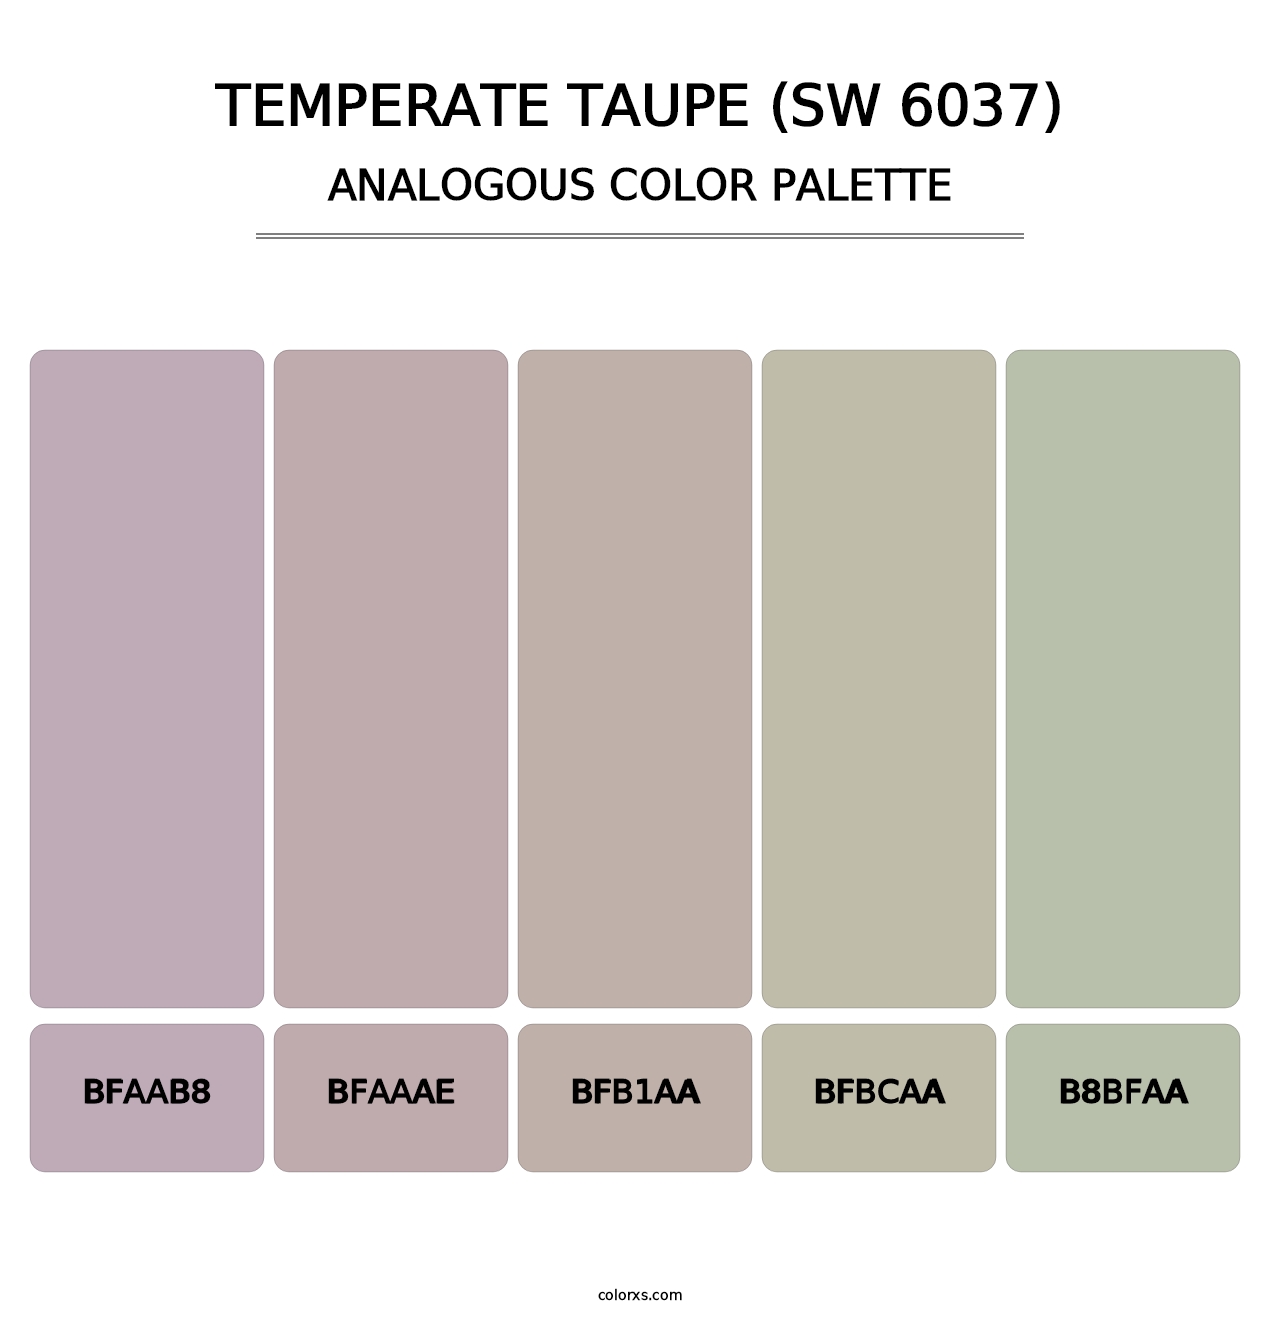 Temperate Taupe (SW 6037) - Analogous Color Palette